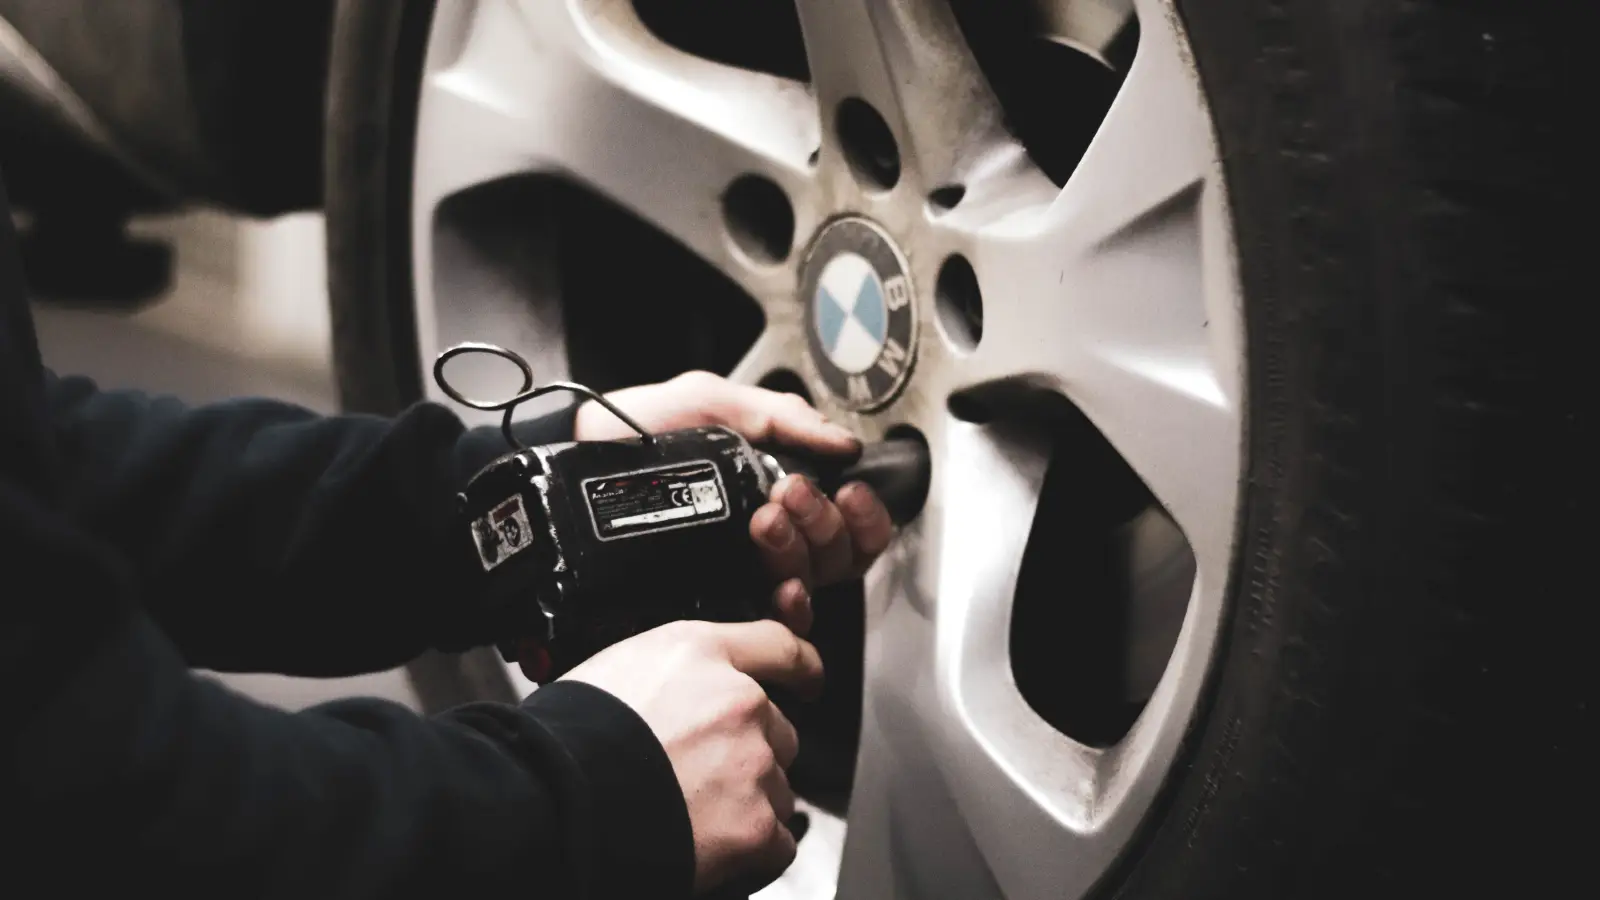 Estimates for replacement brake pads and discs near Worcest